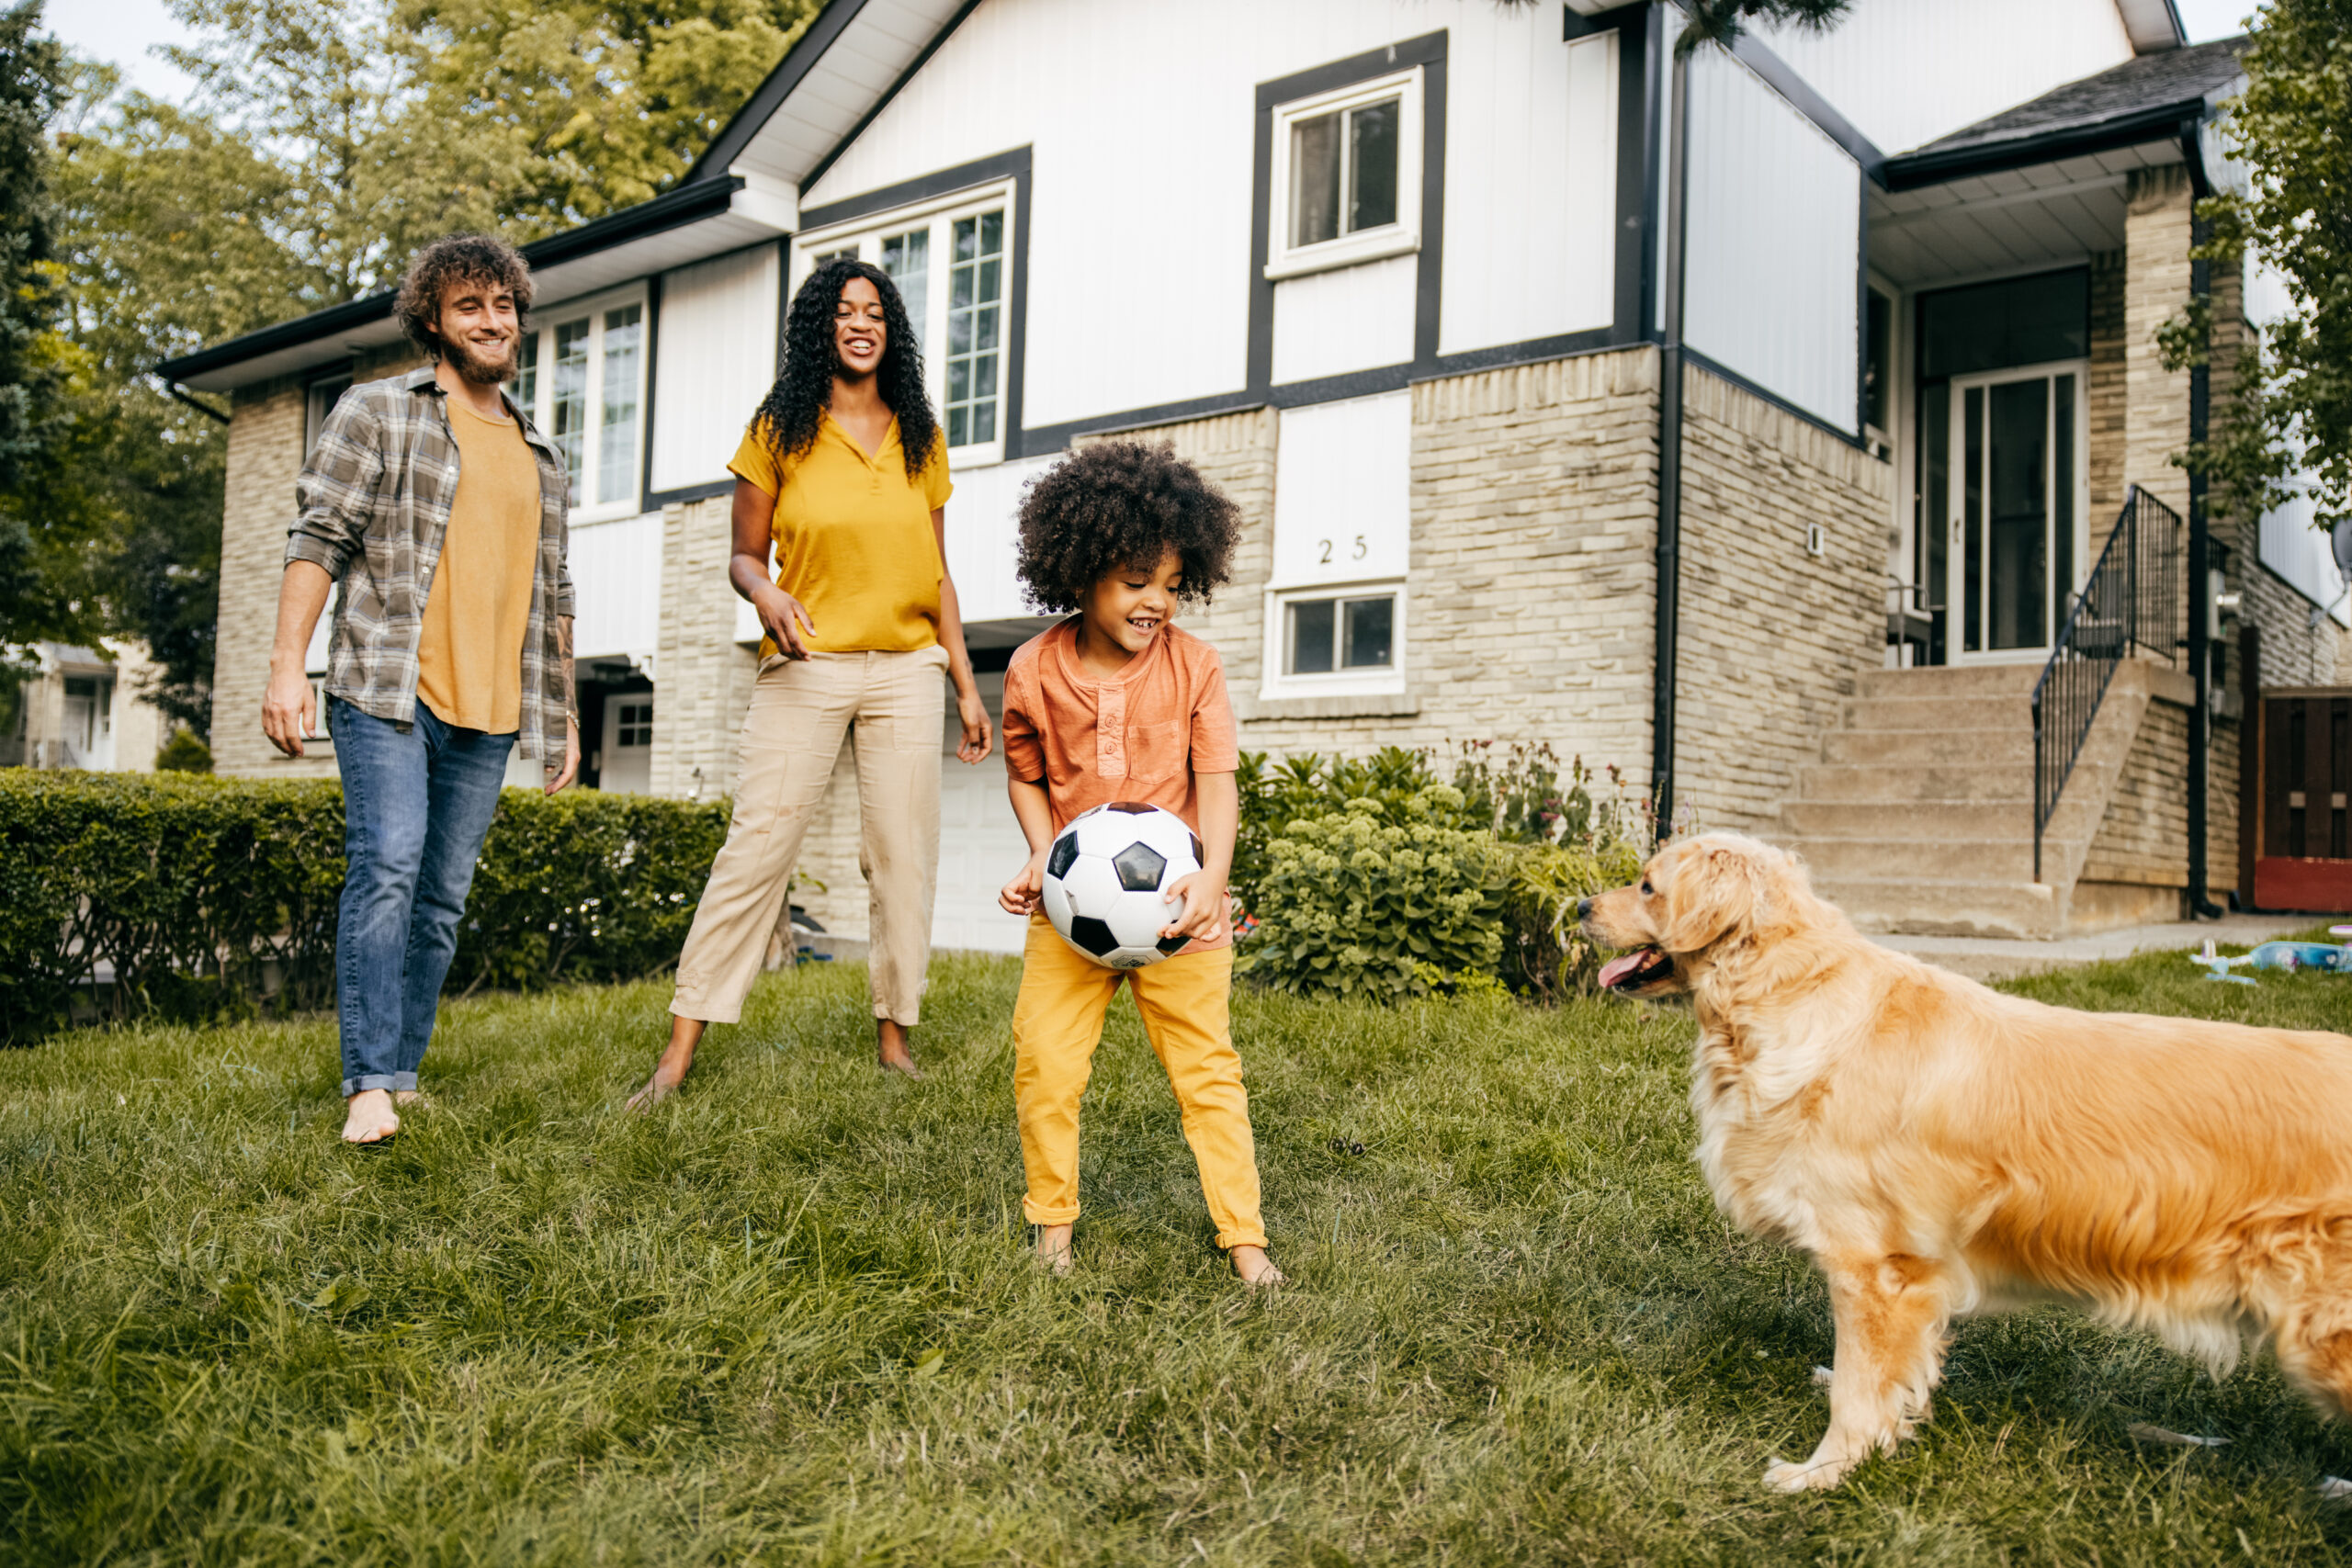 Shot of family playing soccer together with their dog.